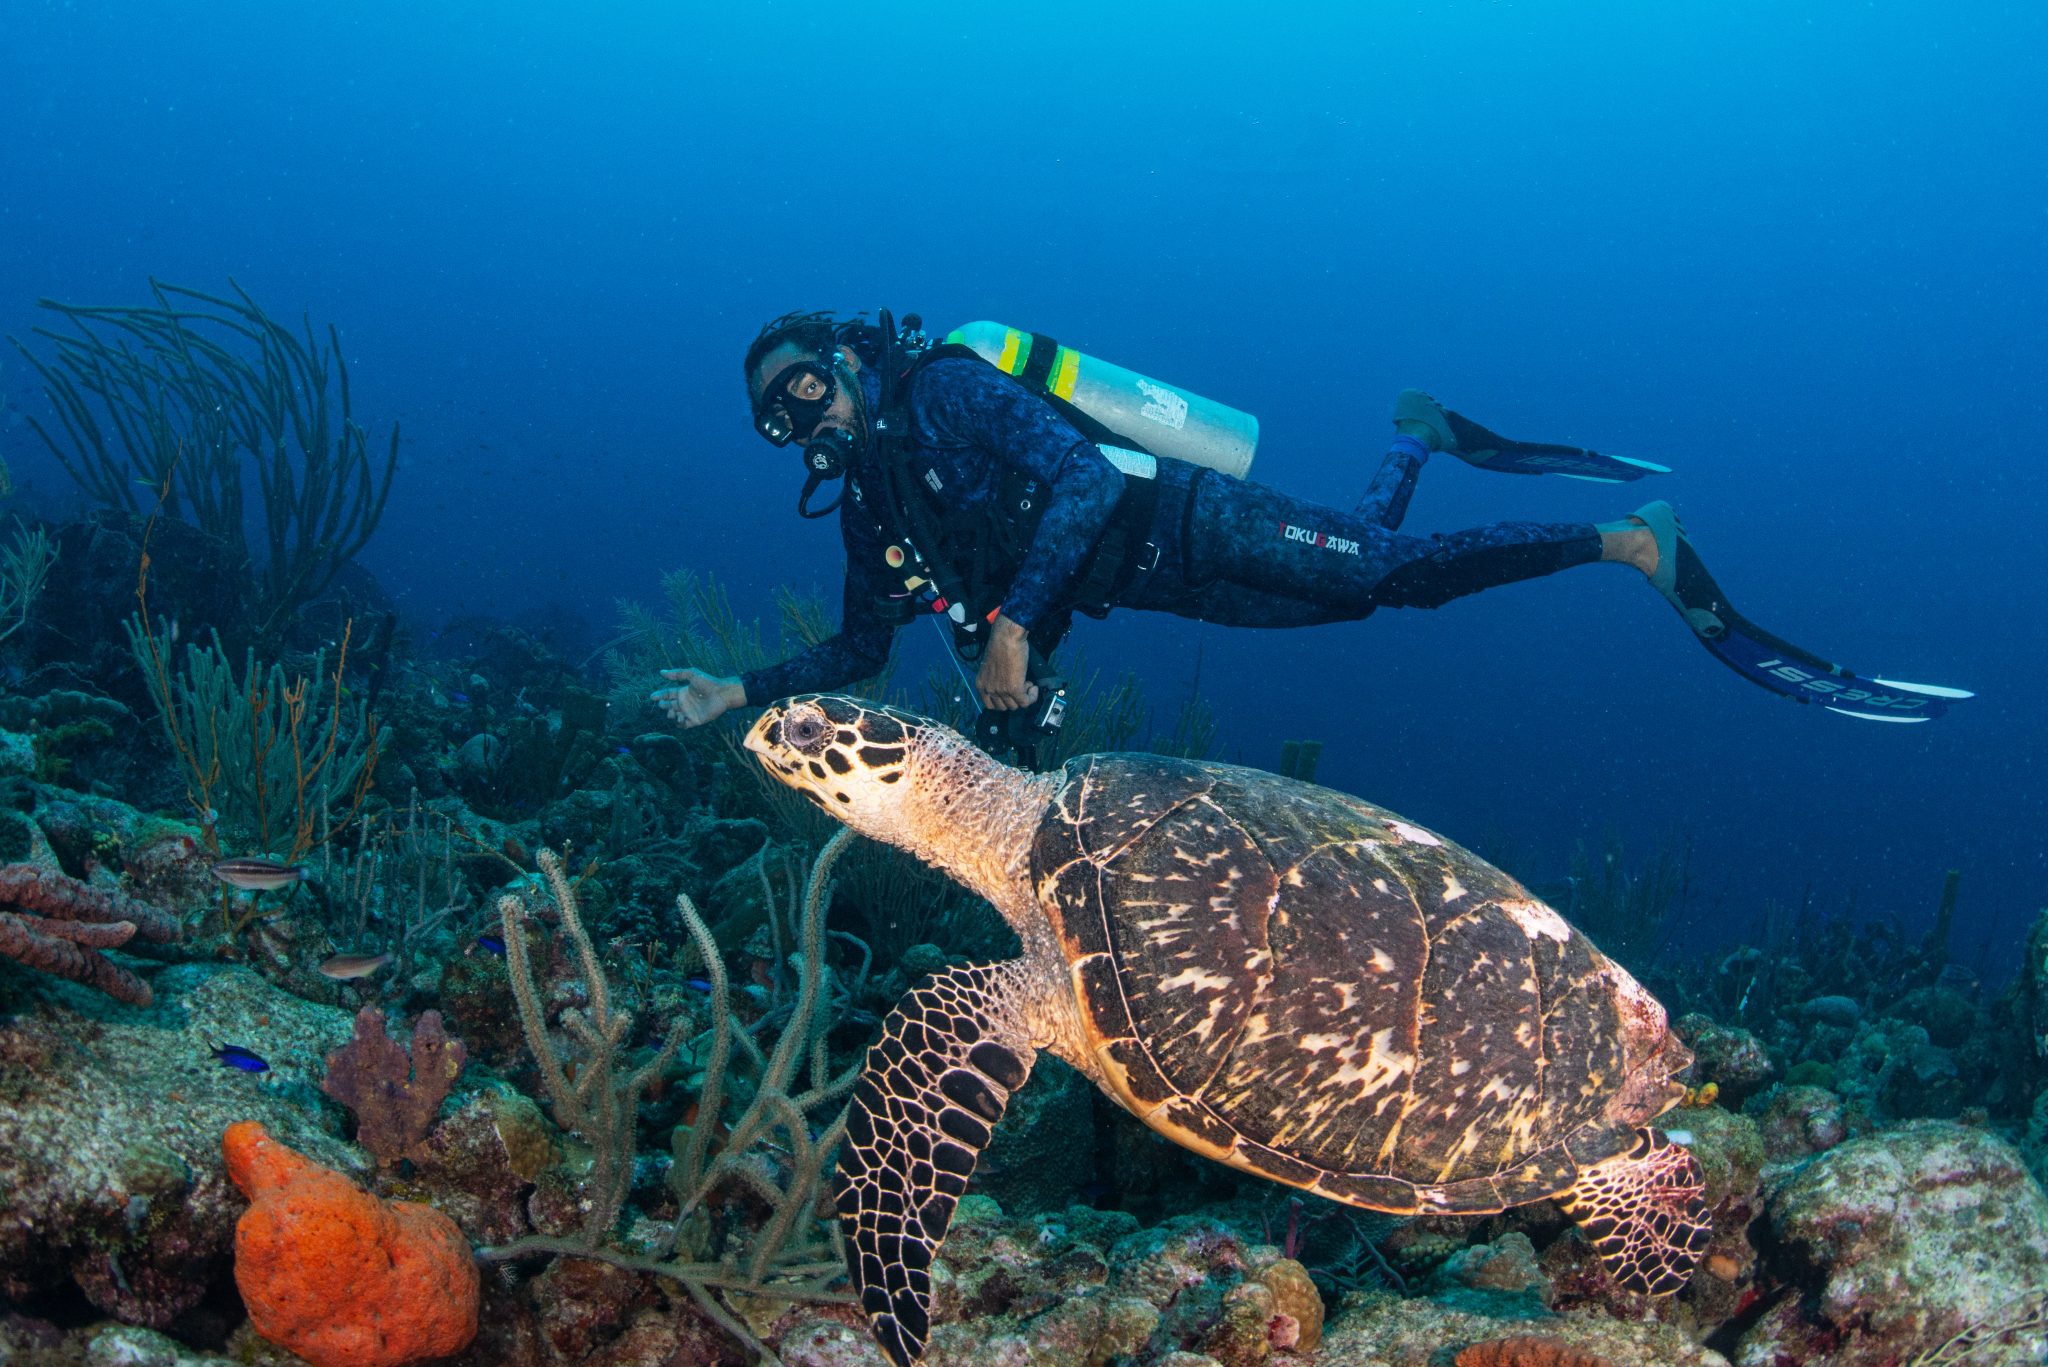 Turtles are abundant on the reefs and wrecks